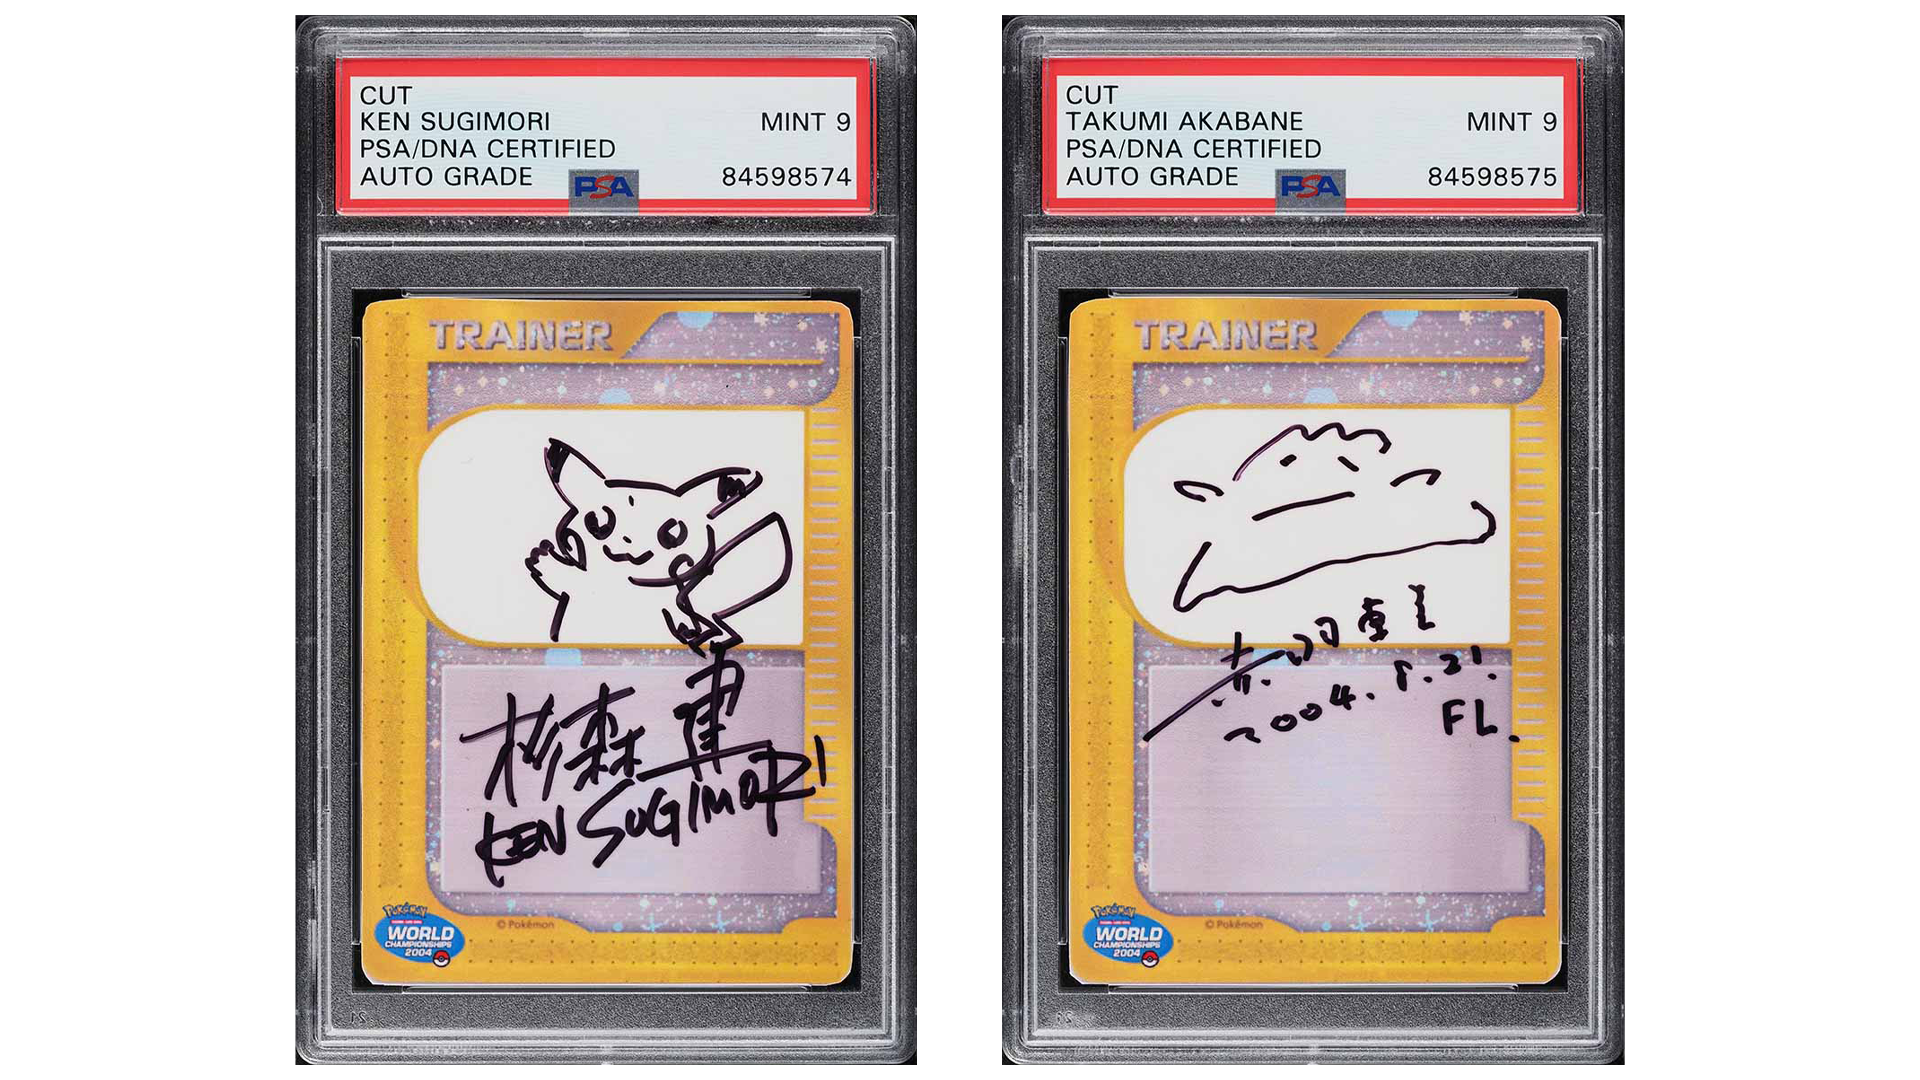 Images of Pokémon Trading Card Game cards autographed by artists.